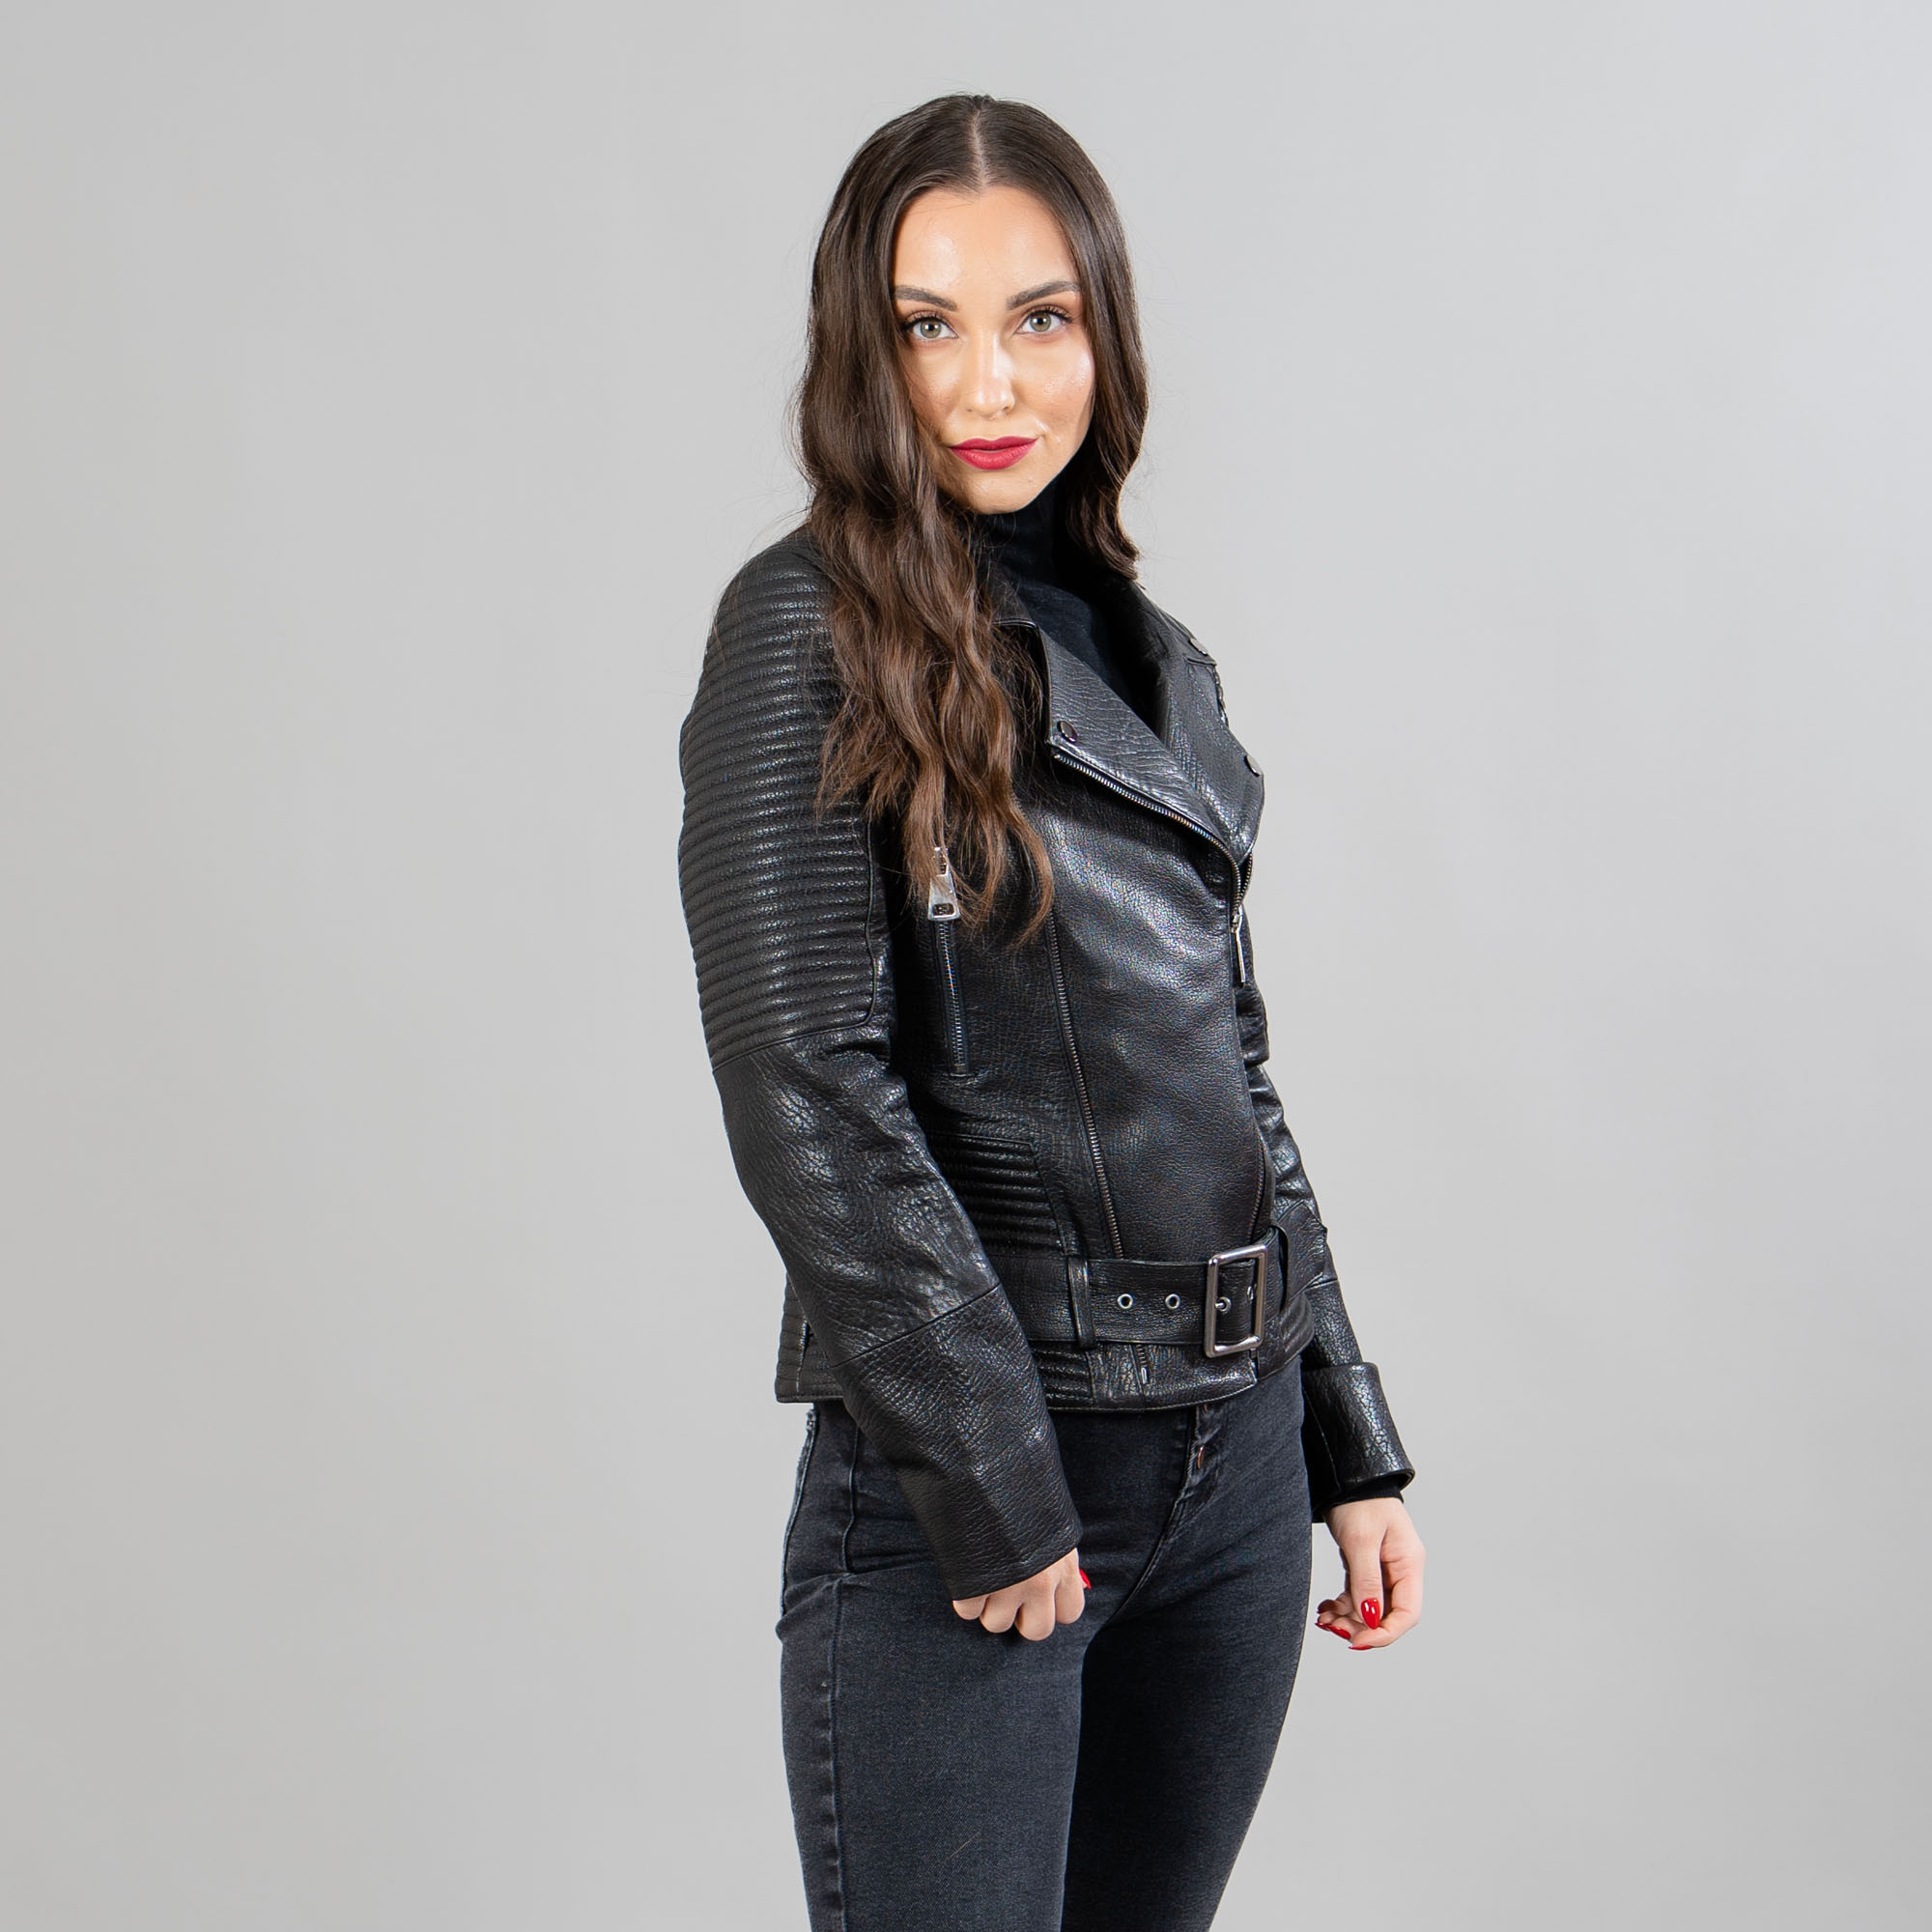 Leather jacket with a belt in black color